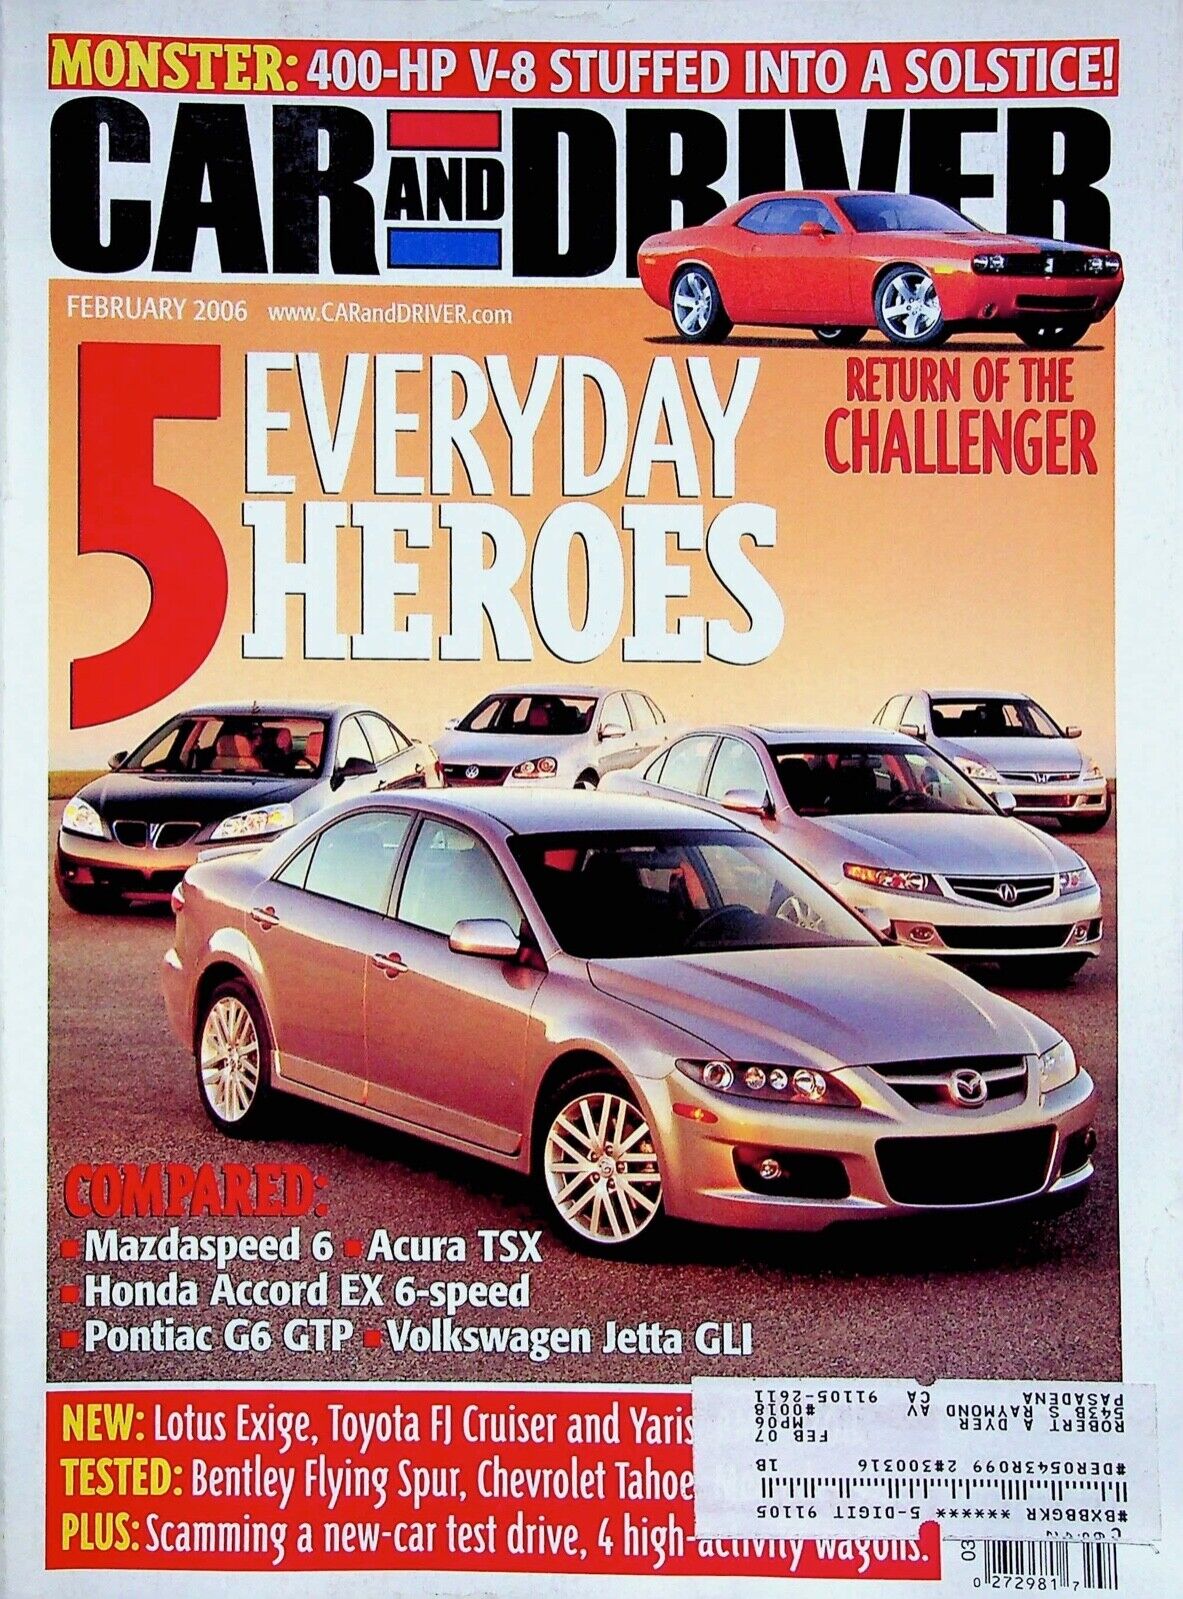 5 EVERYDAY HEROES  - ROAD AND DRIVER, FEBRUARY VOLUME 51 NUMBER 8 2006 GOOD USED